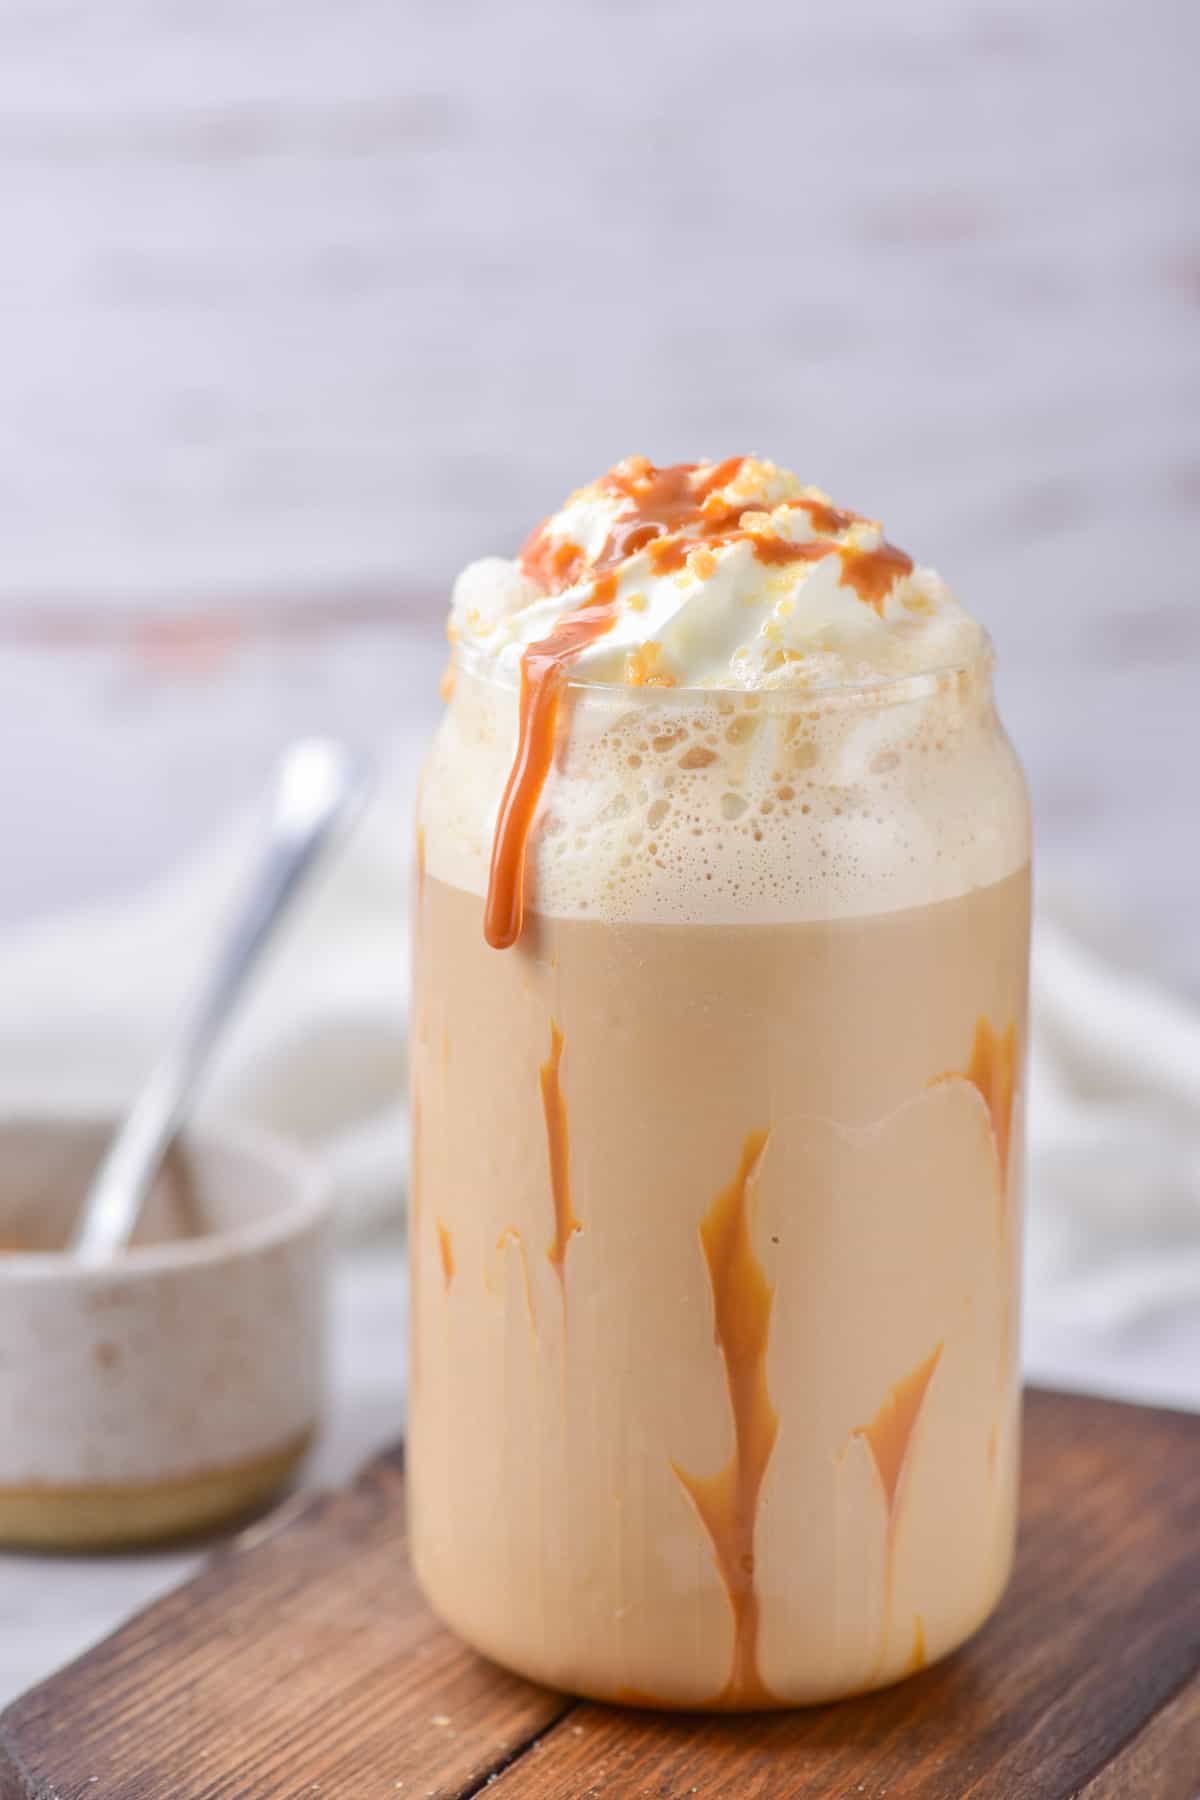 Side view of a glass with caramel sauce around the inside, frappuccino, whipped cream and crushed caramel candies.